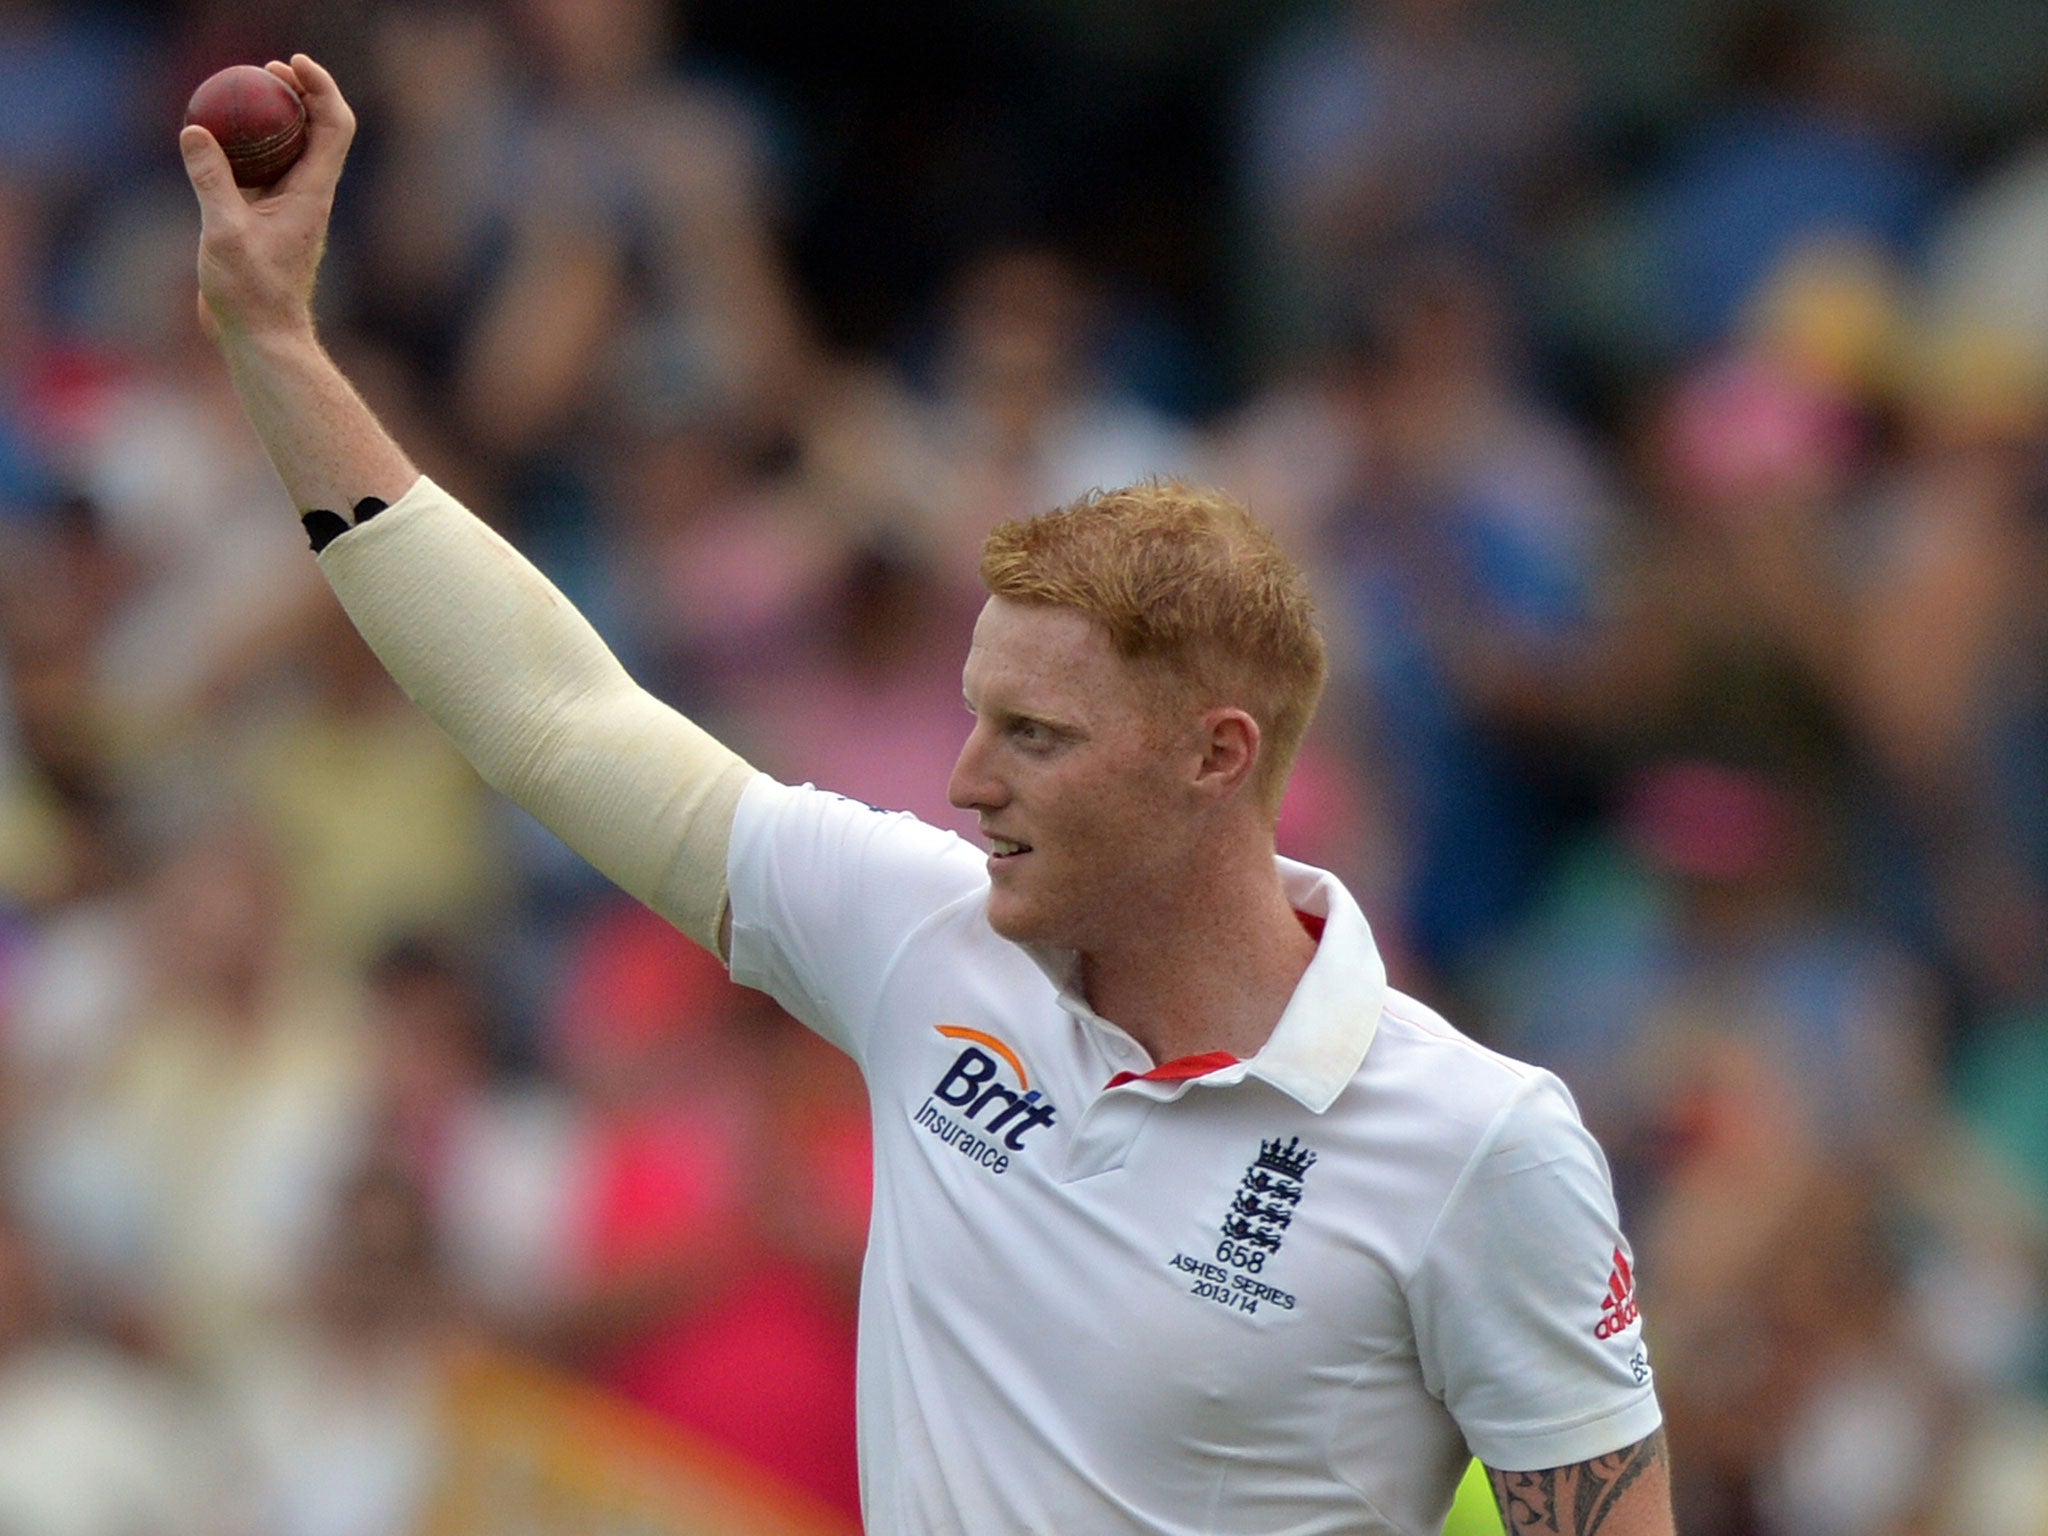 England all-rounder Ben Stokes took six wickets on day one of the fifth and final Ashes Test